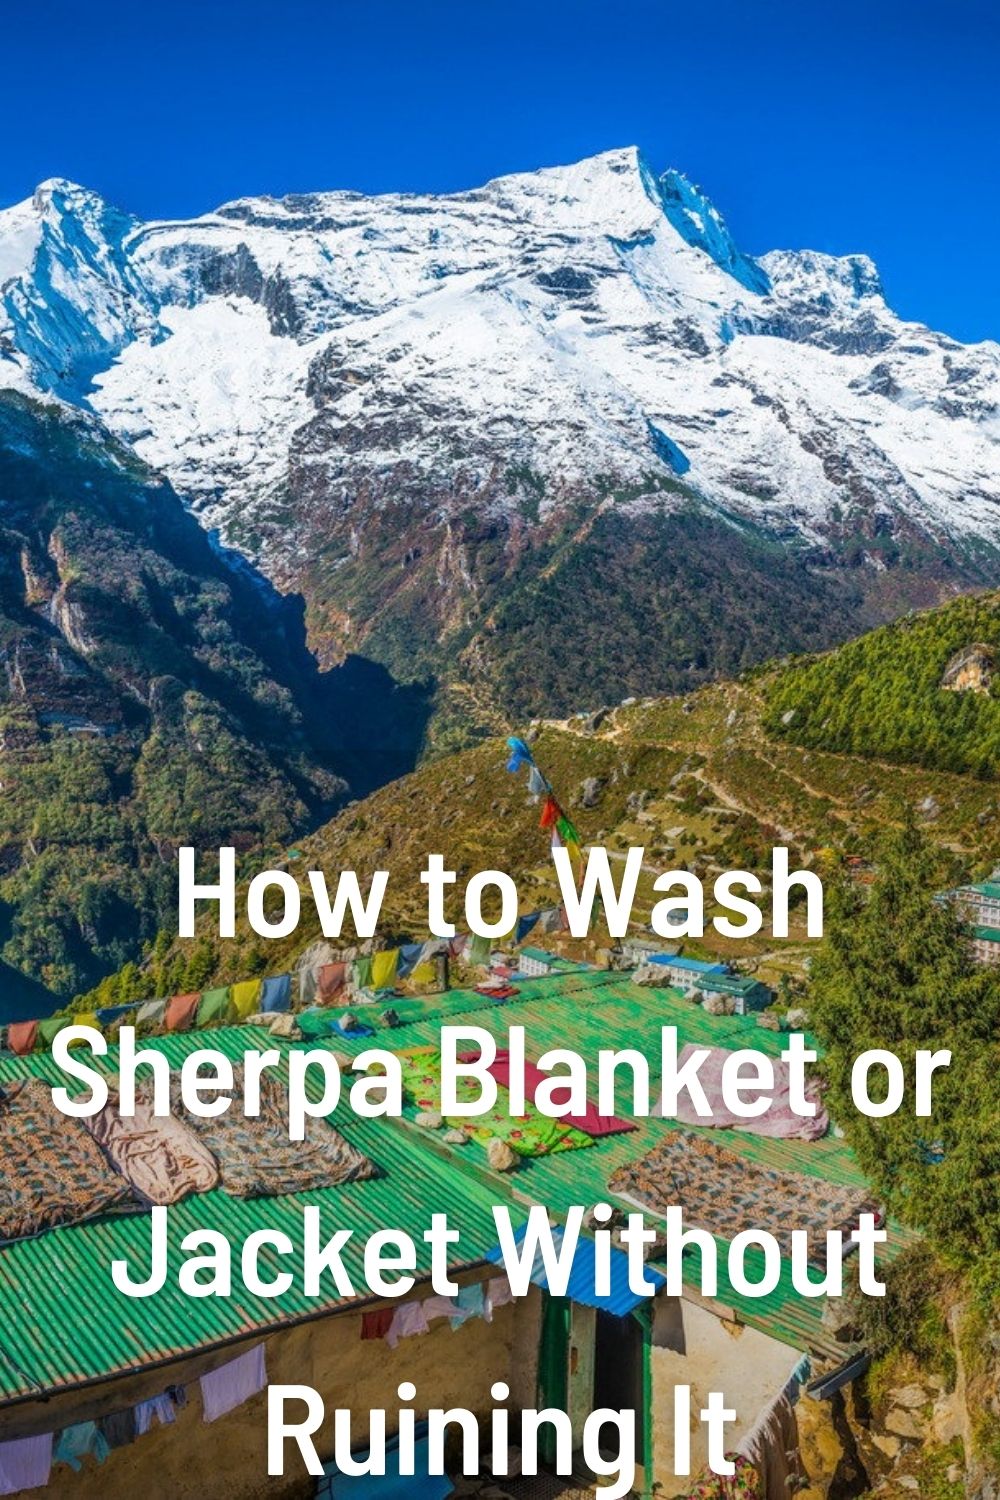 How to Wash Sherpa Blanket or Jacket Without Ruining It